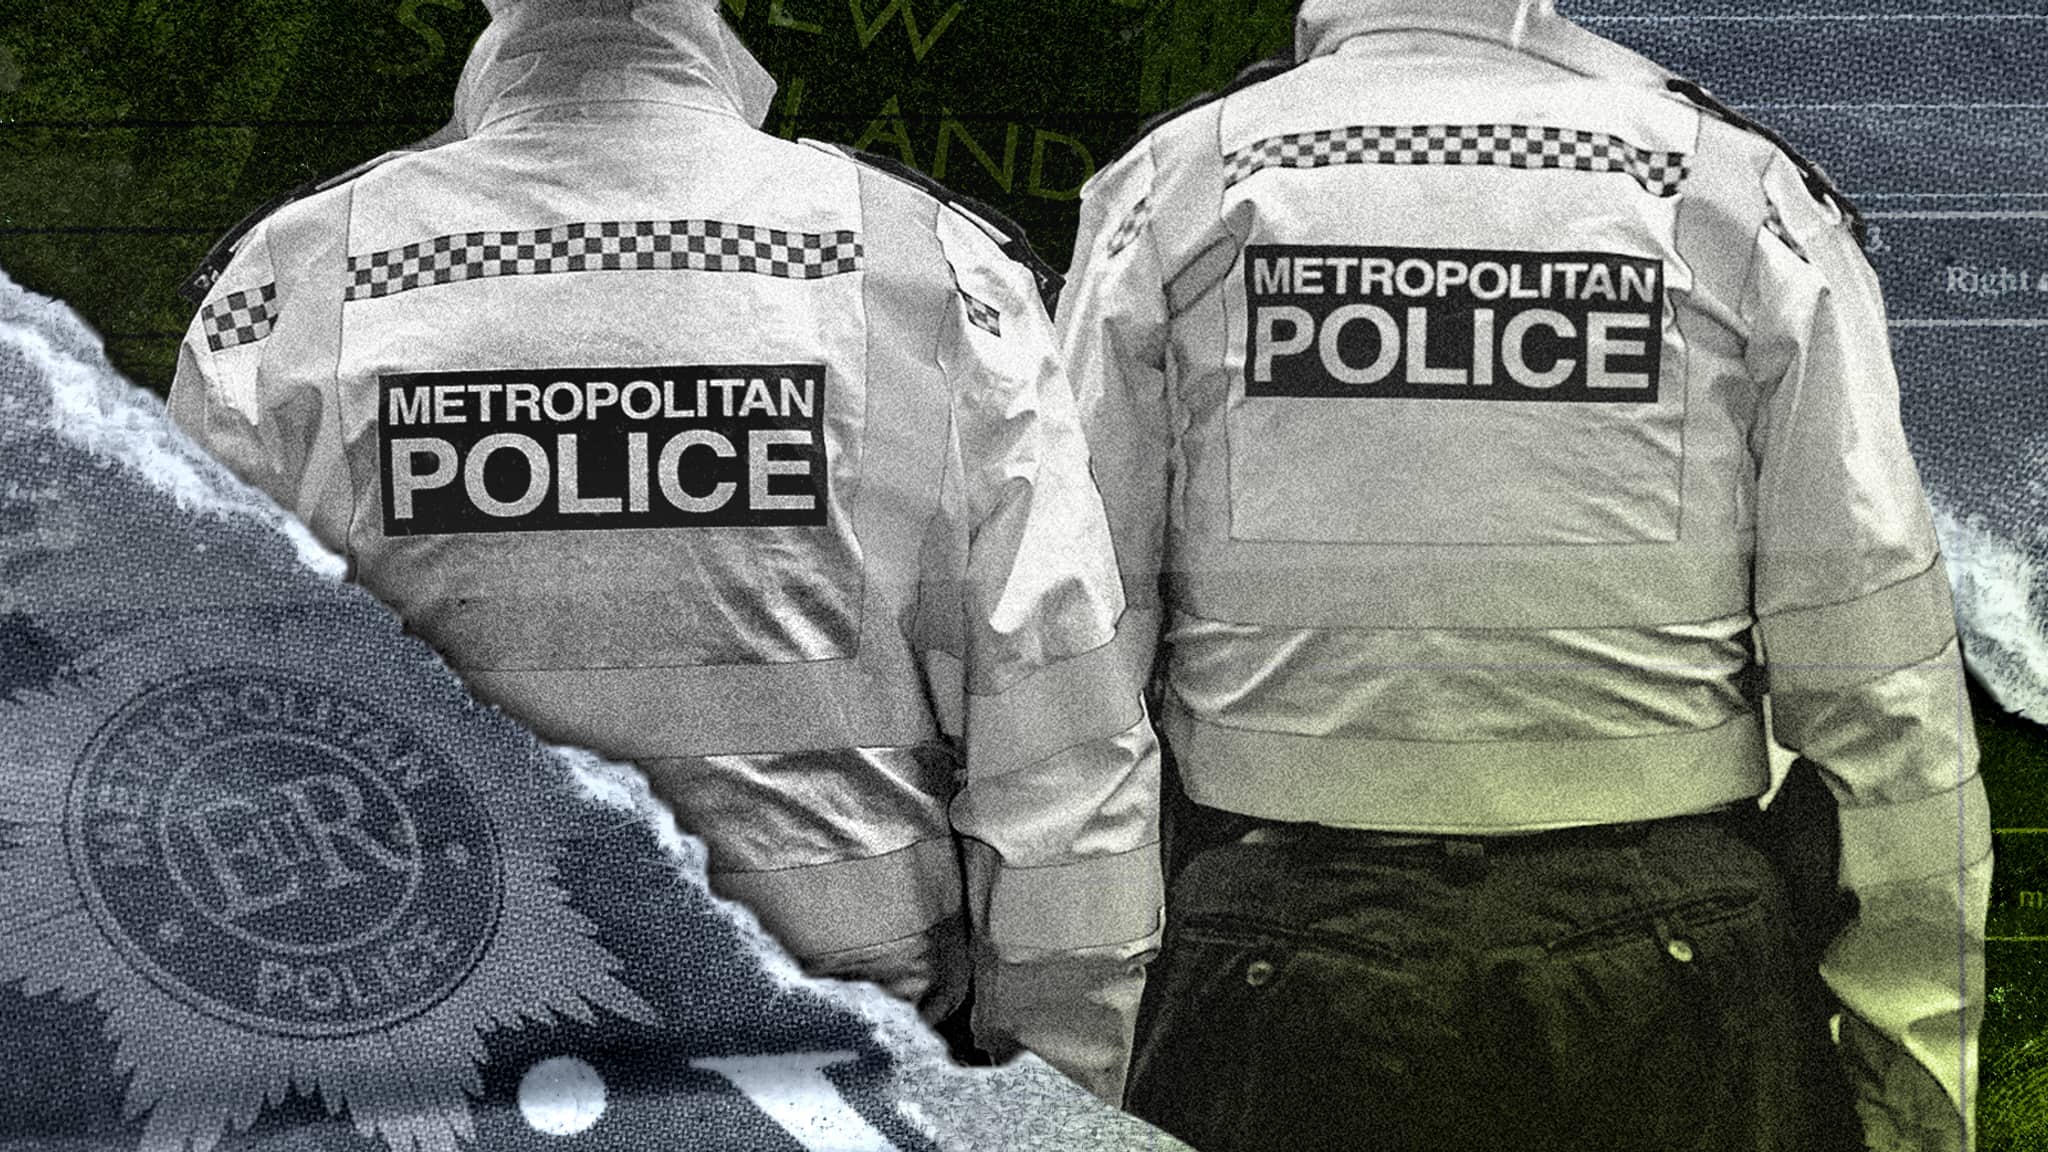 Report: UK's Met Police 'Racist, Misogynistic, and Homophobic'